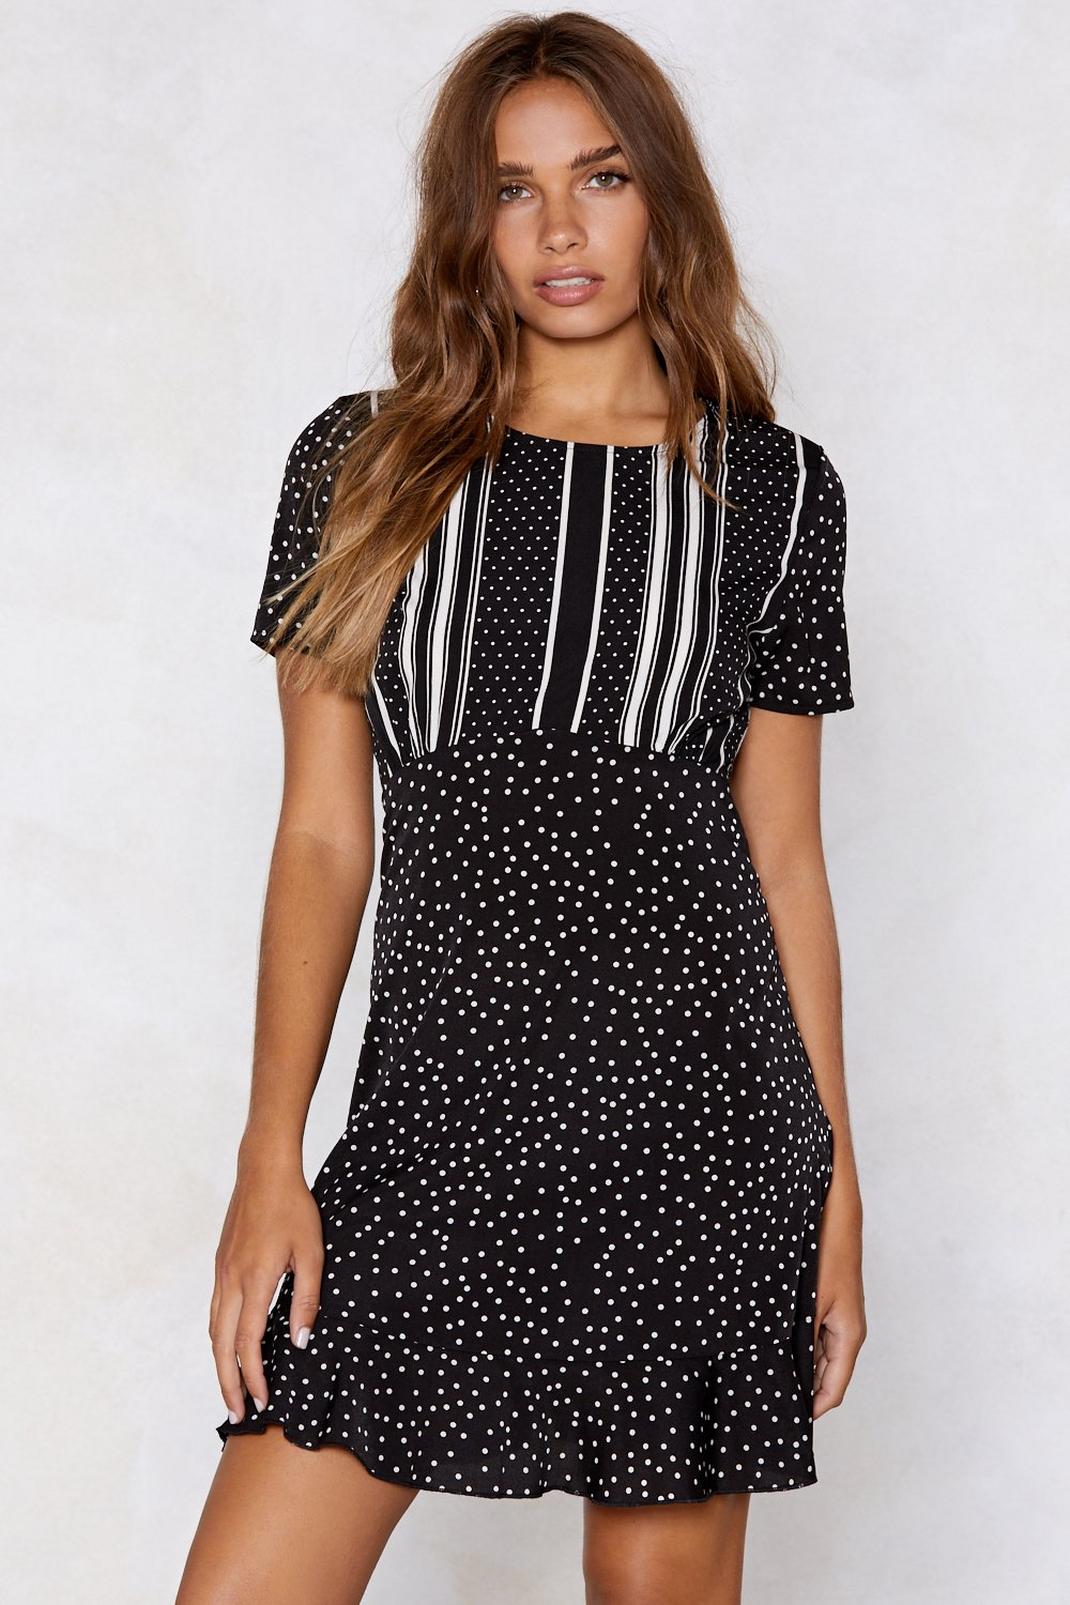 Opposites Attract Striped and Polka Dot Dress | Nasty Gal